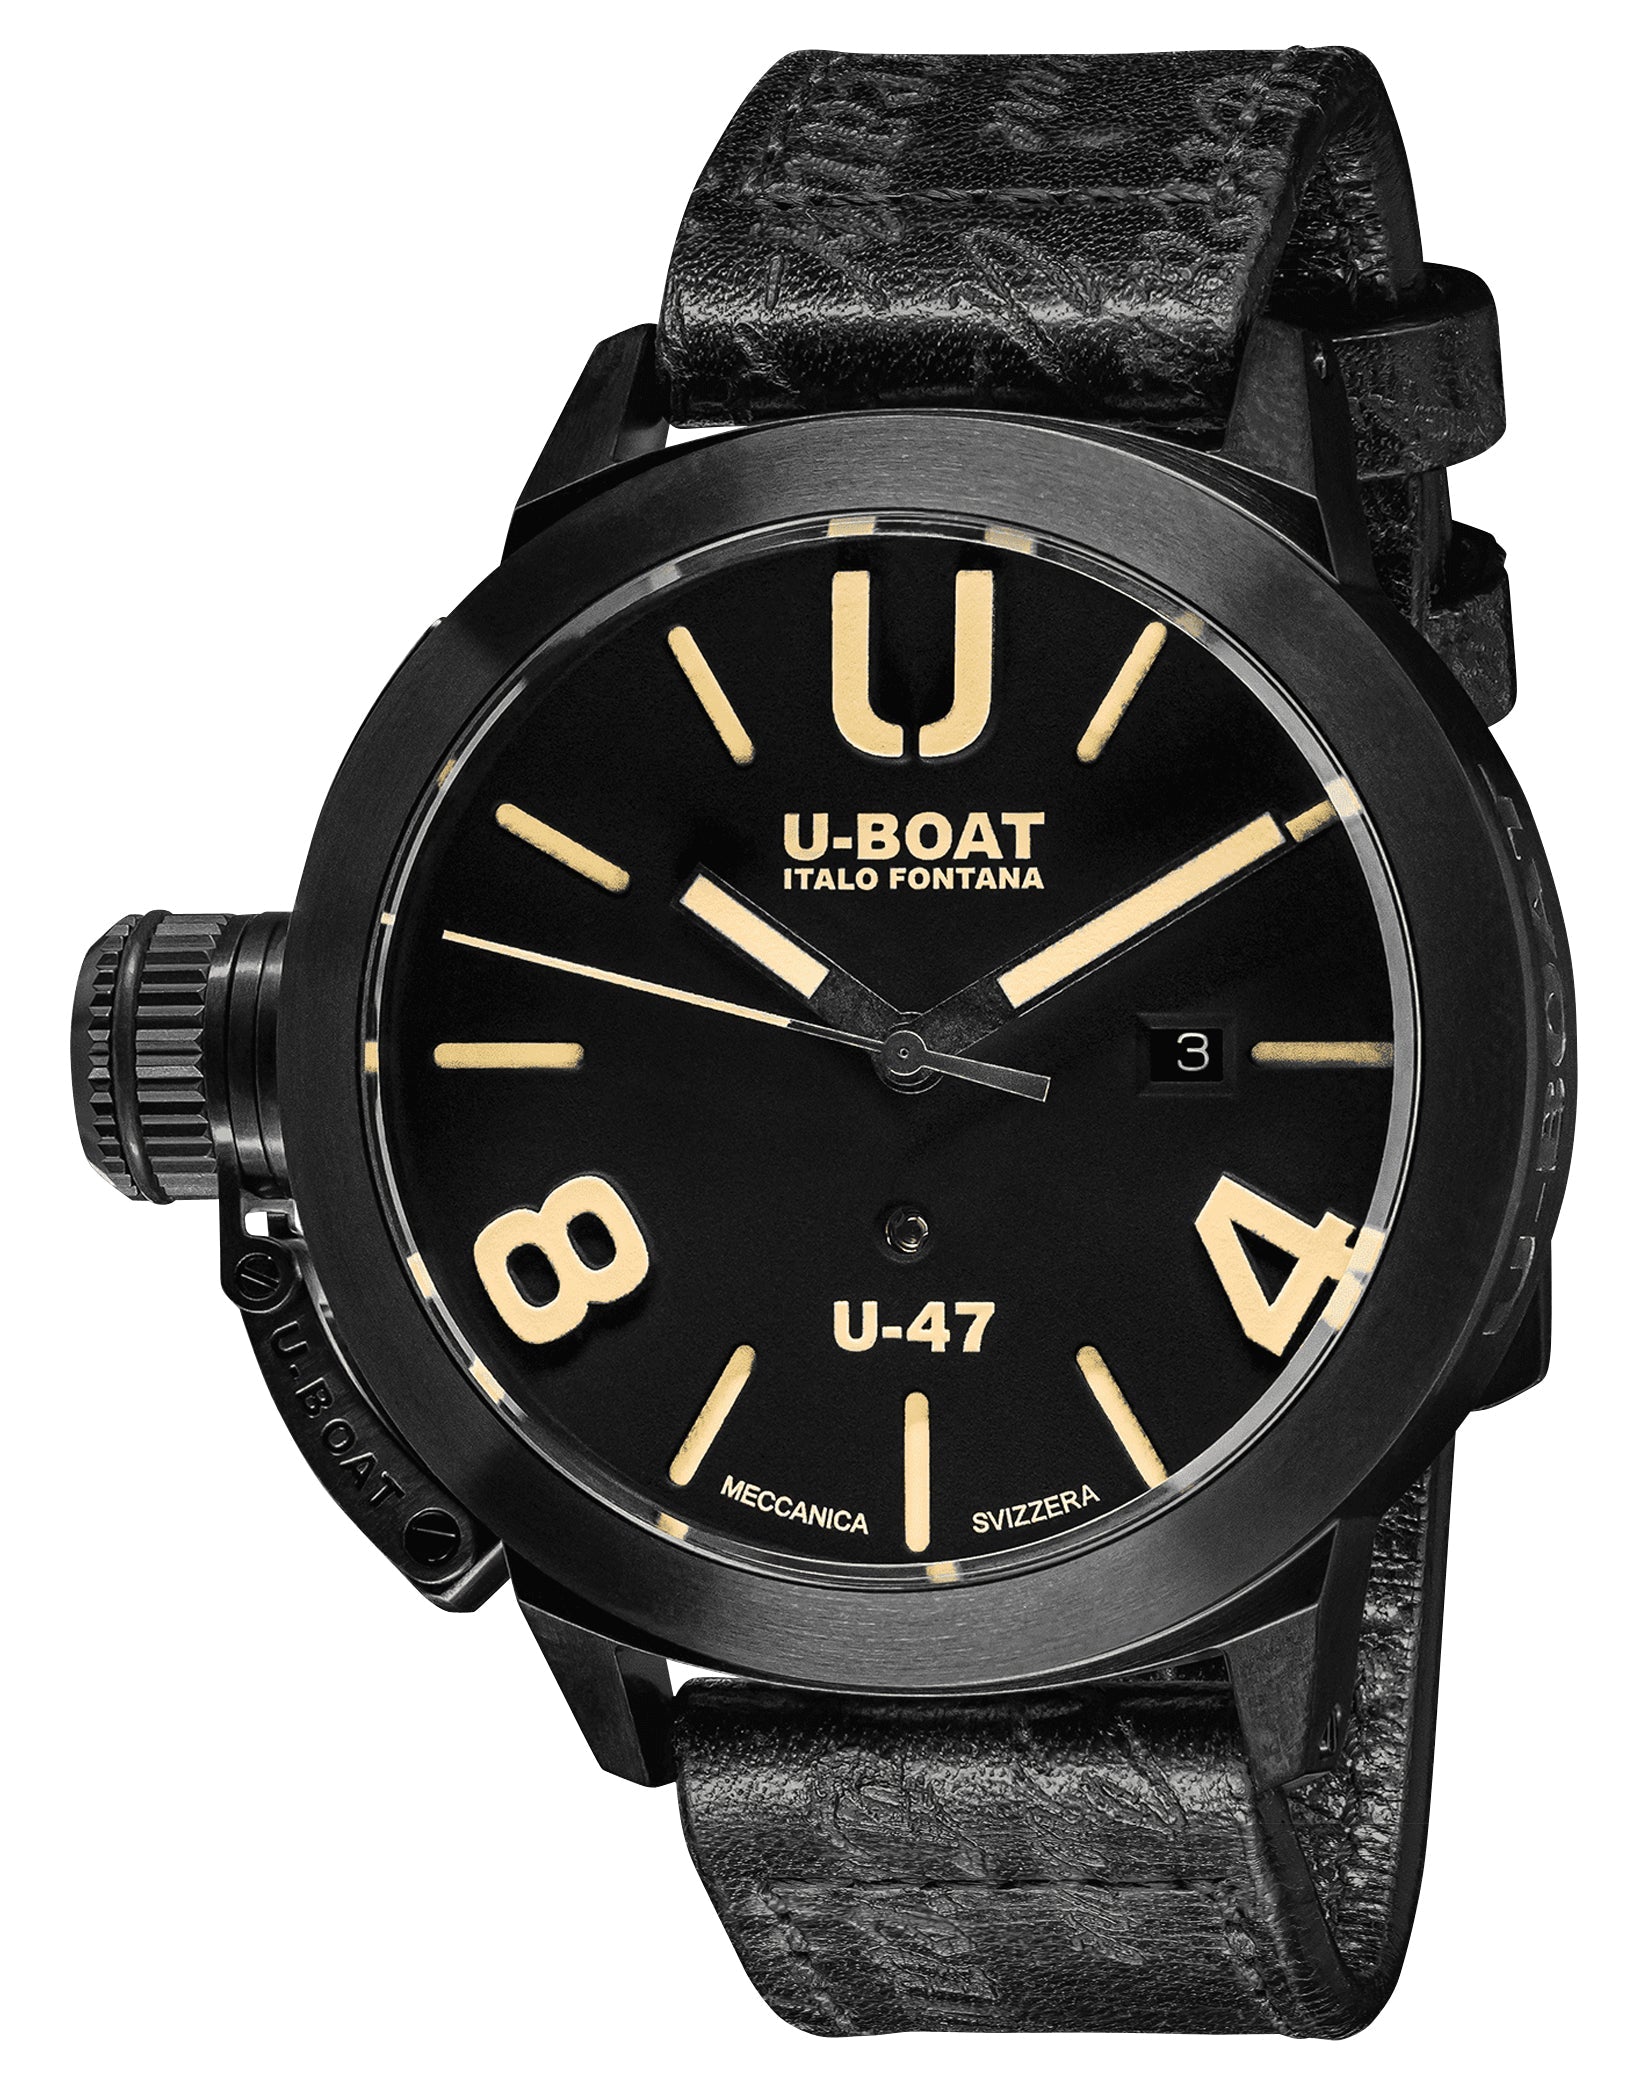 update alt-text with template Watches - Mens-U-Boat-9160-45 - 50 mm, black, black PVD case, Classico U-47, date, leather, mens, menswatches, new arrivals, round, rpSKU_7797, rpSKU_8105, rpSKU_8106, rpSKU_8890, rpSKU_8893, swiss automatic, U-Boat, watches-Watches & Beyond